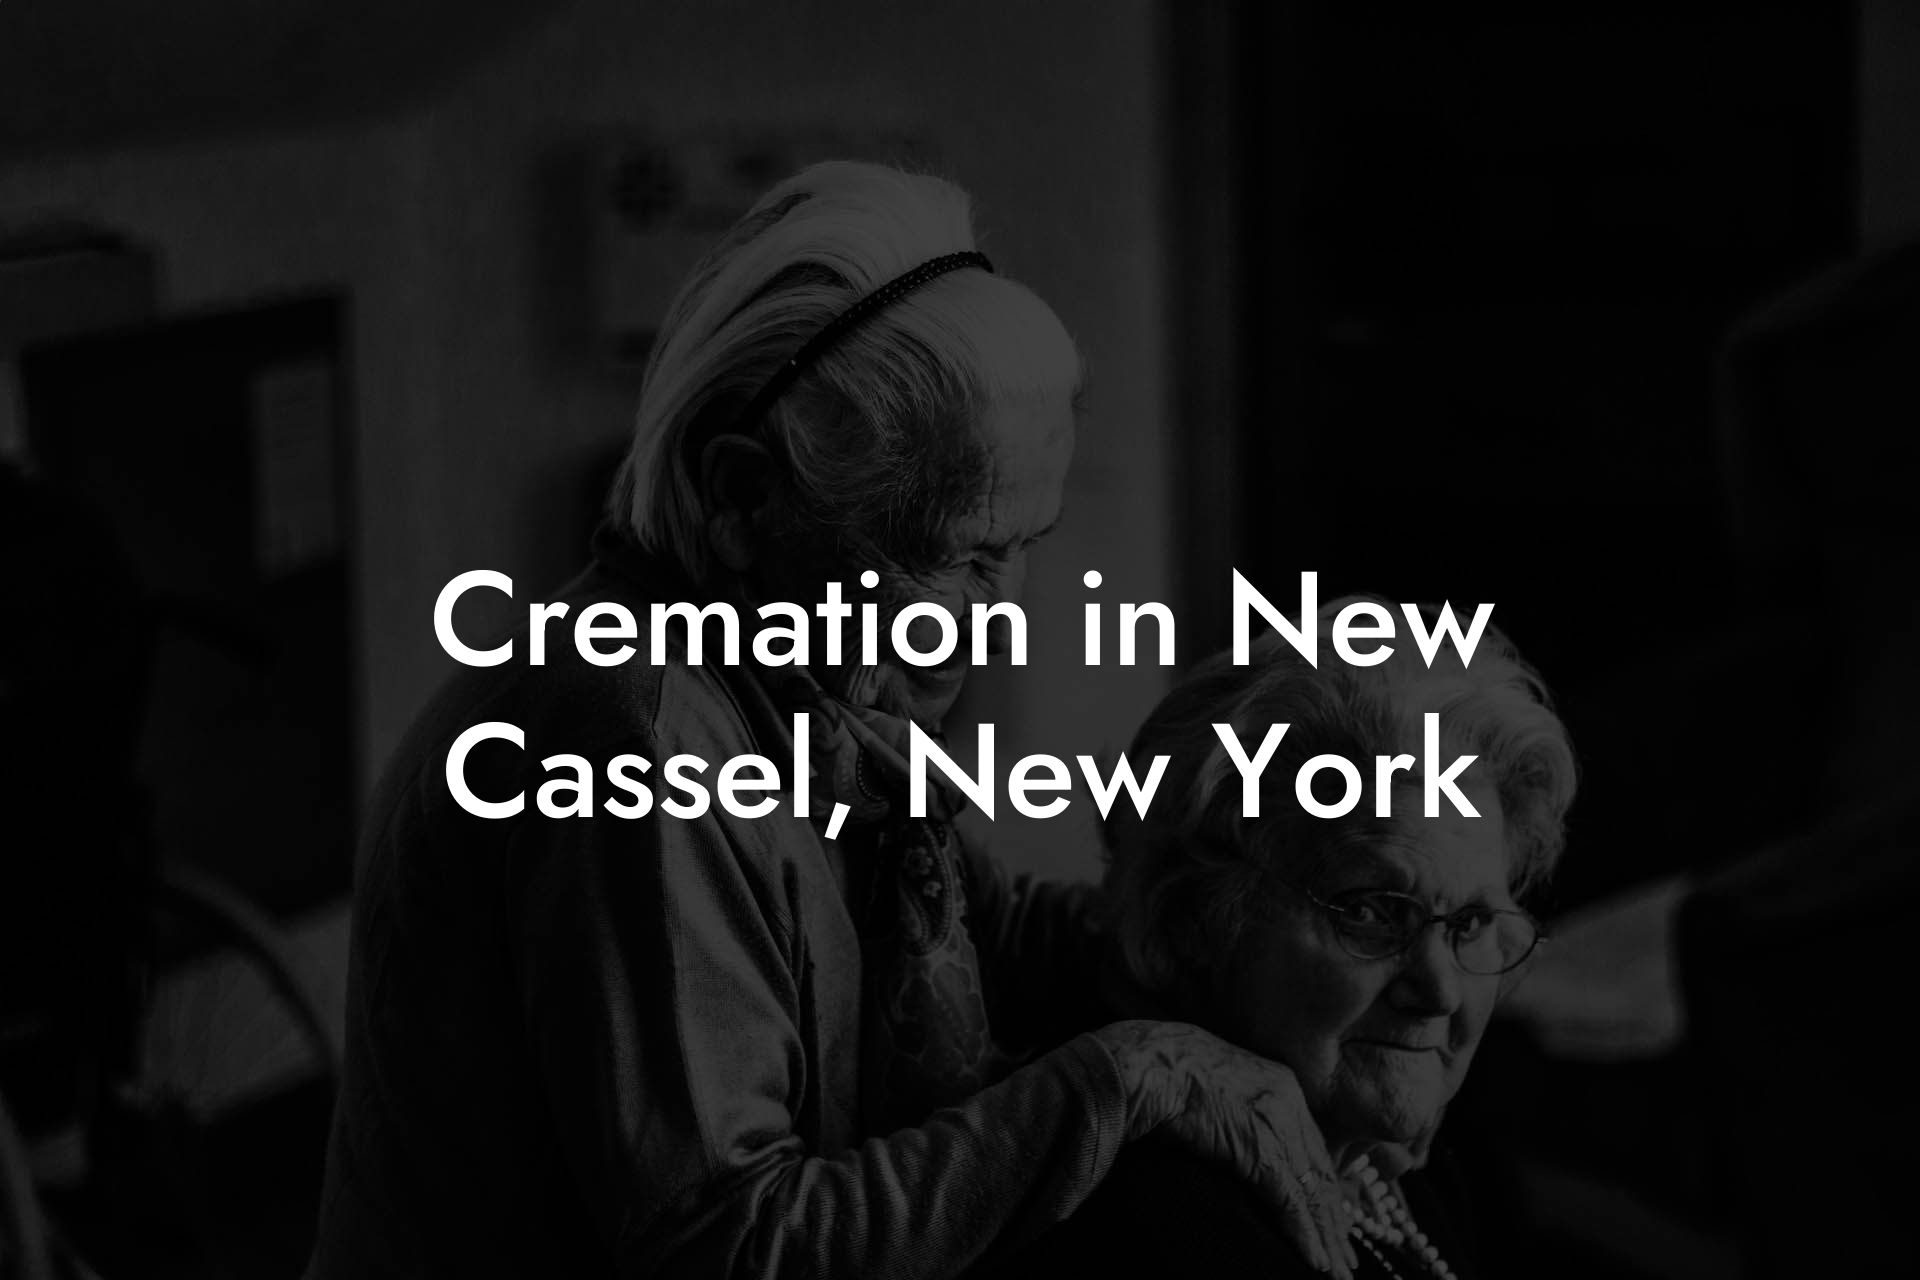 Cremation in New Cassel, New York